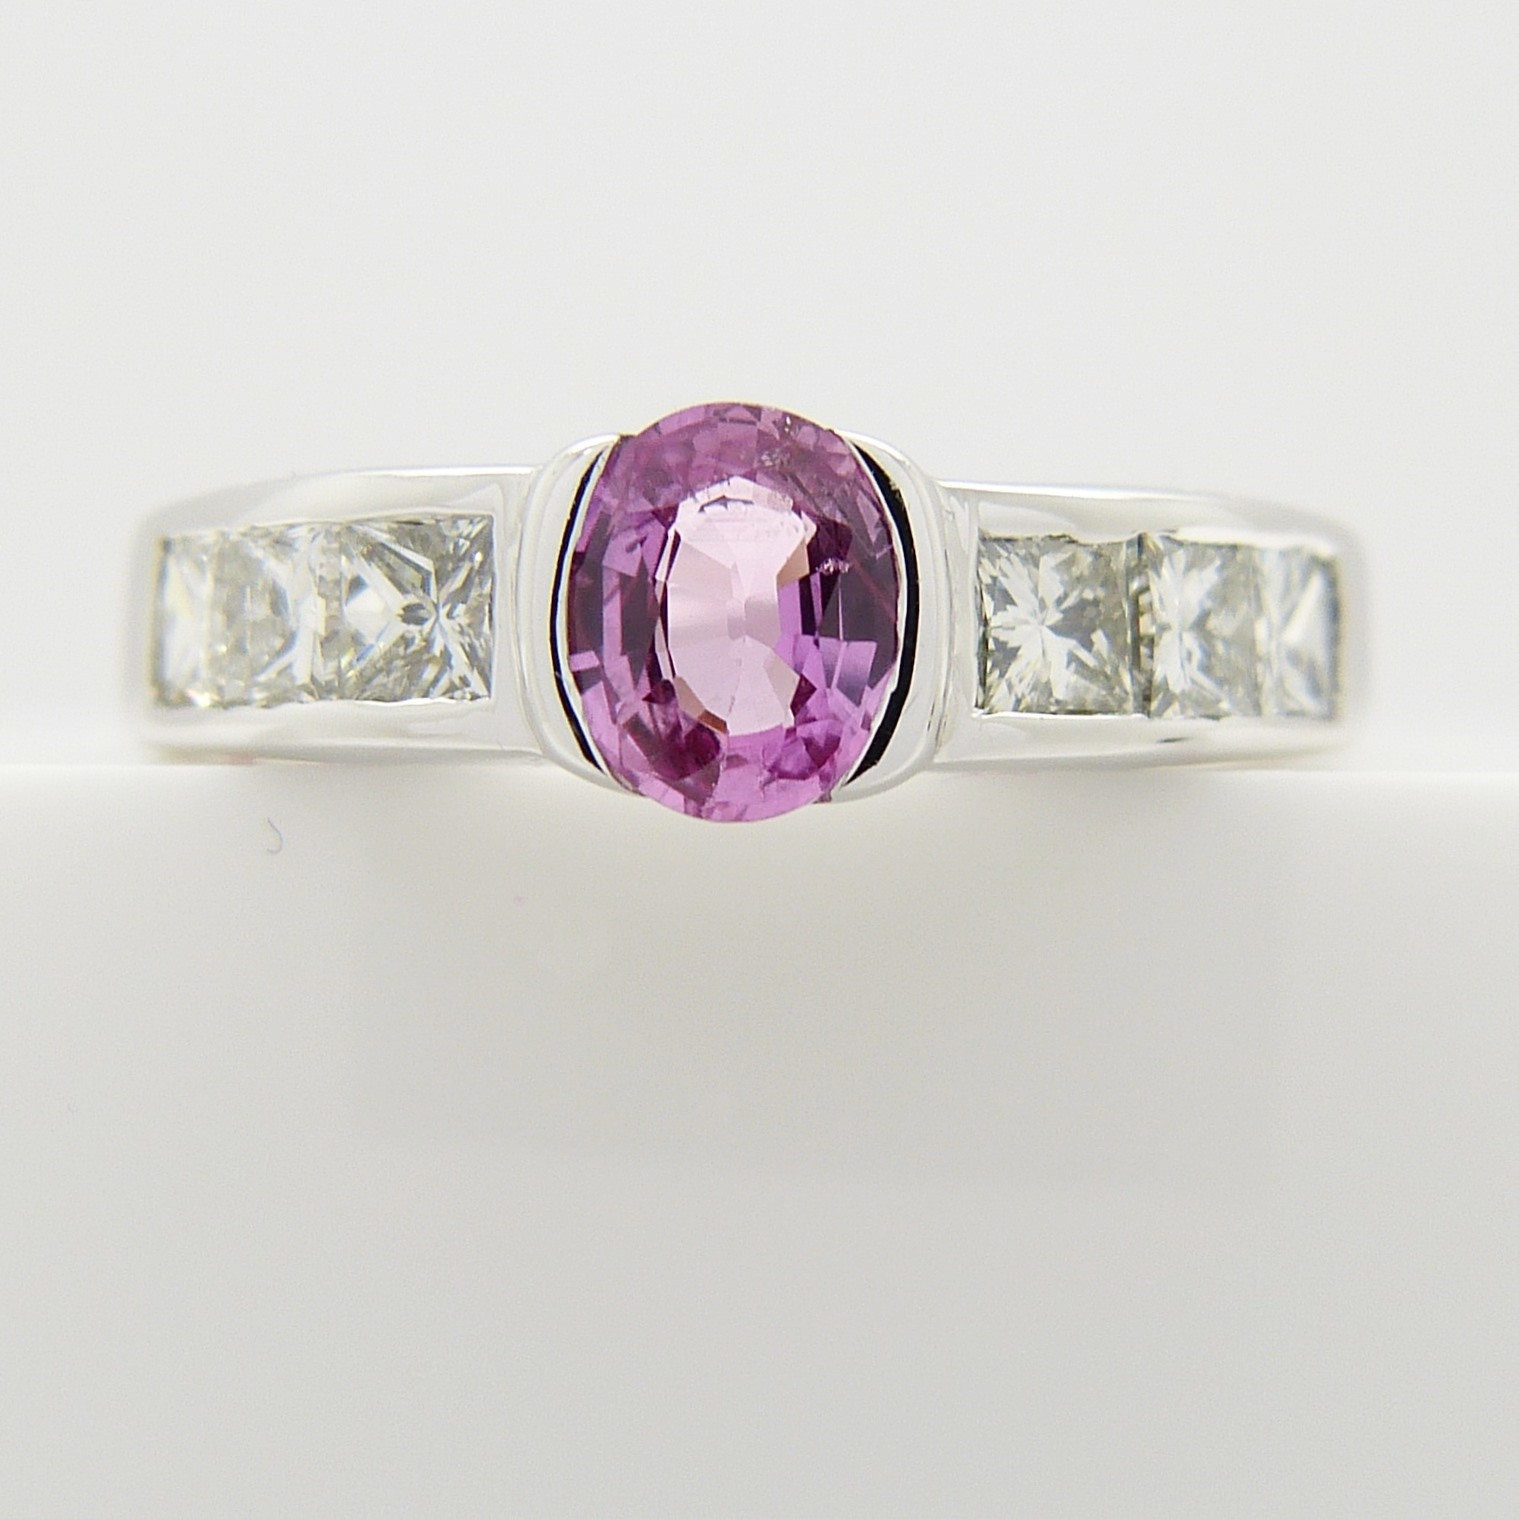 A pink Sapphire gemstone and princess-cut Diamond ring in 18ct white Gold - Image 7 of 7